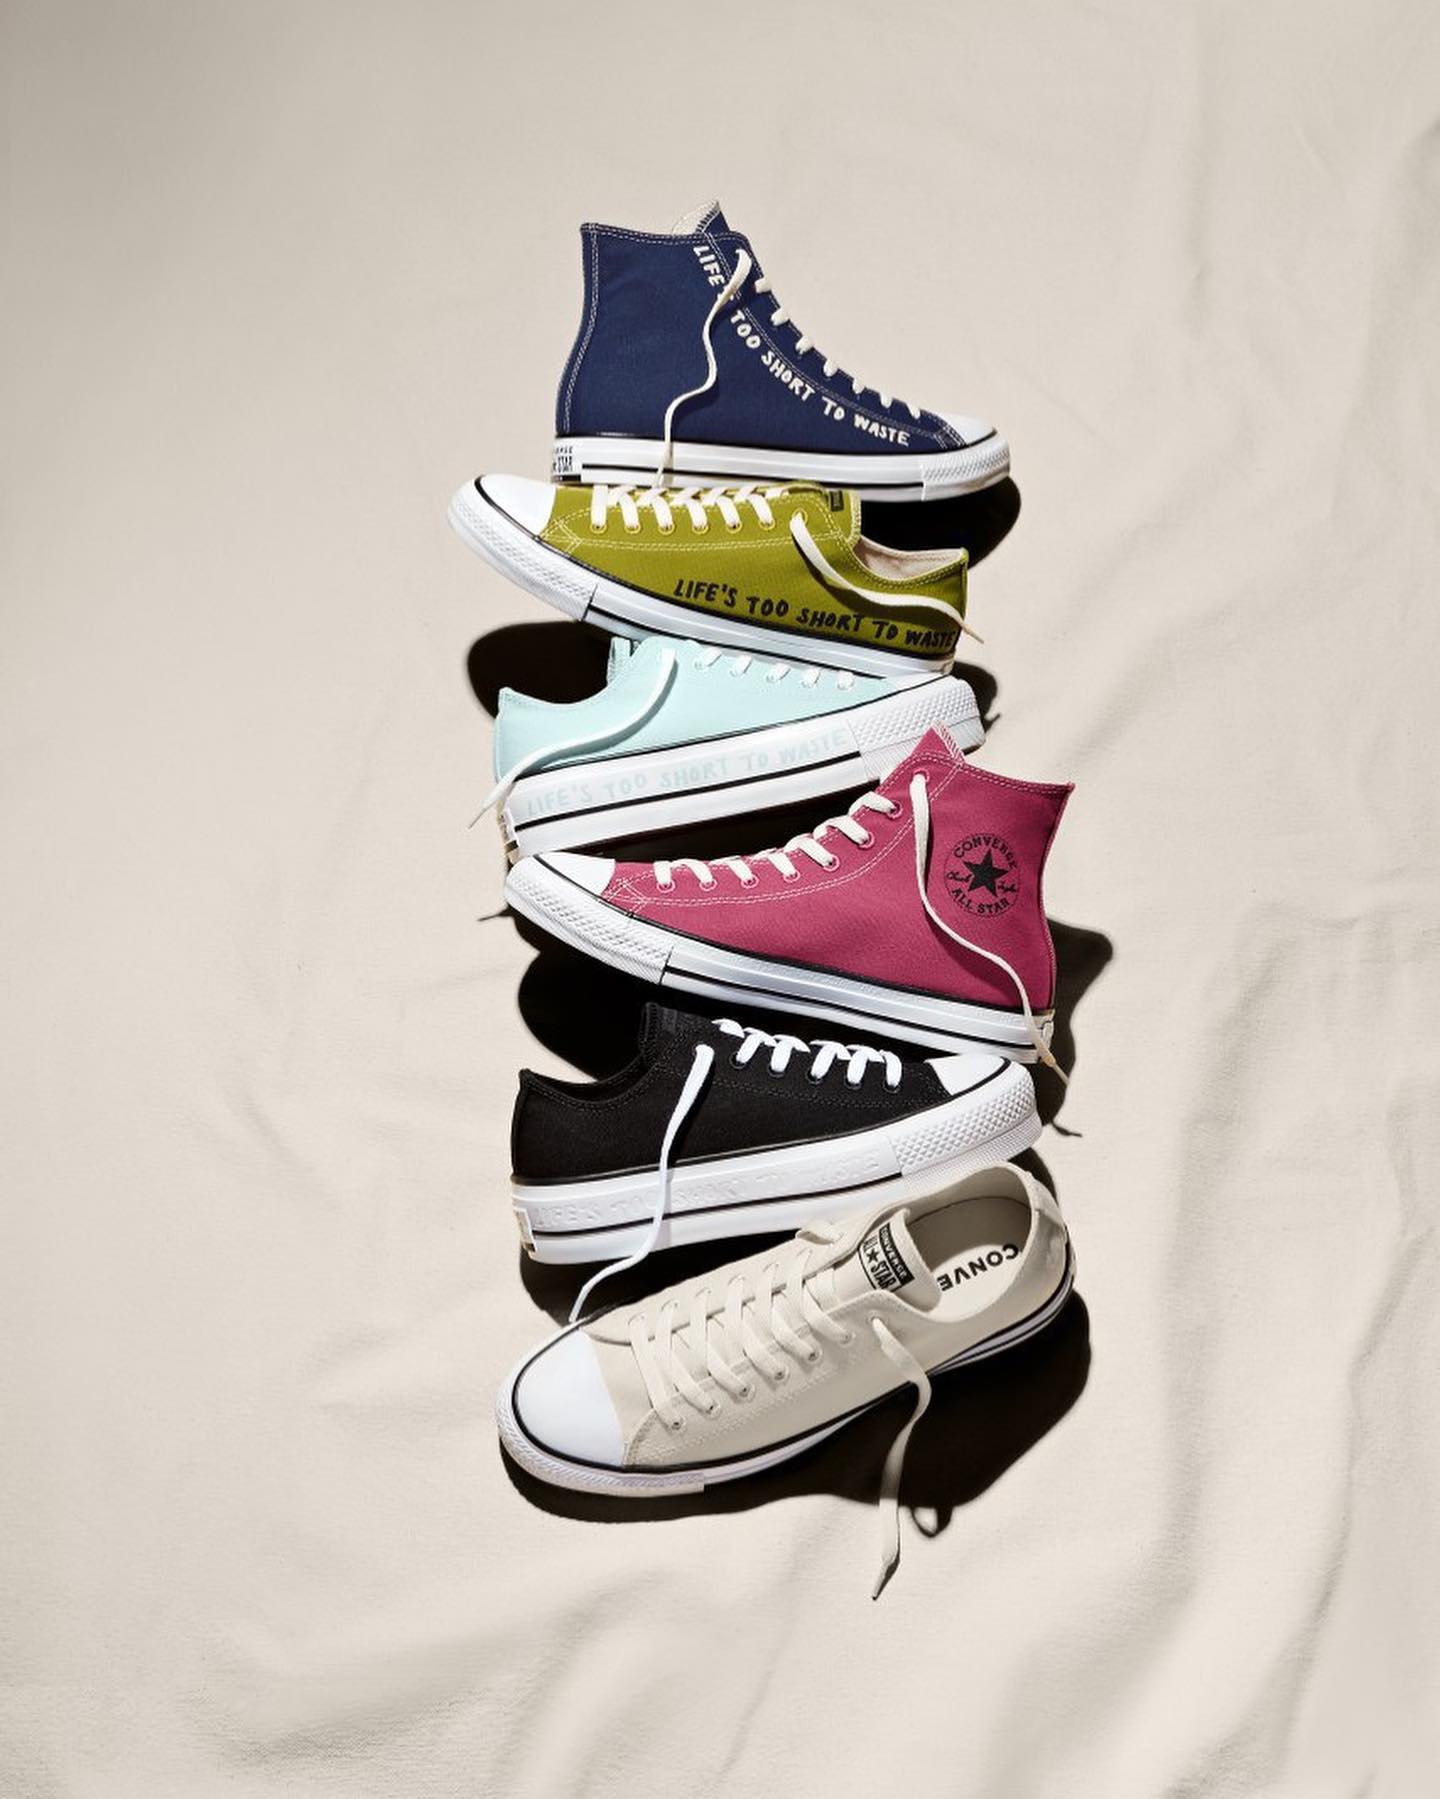 Converse Renew sneakers made from recycled plastic bottles sold in S ...